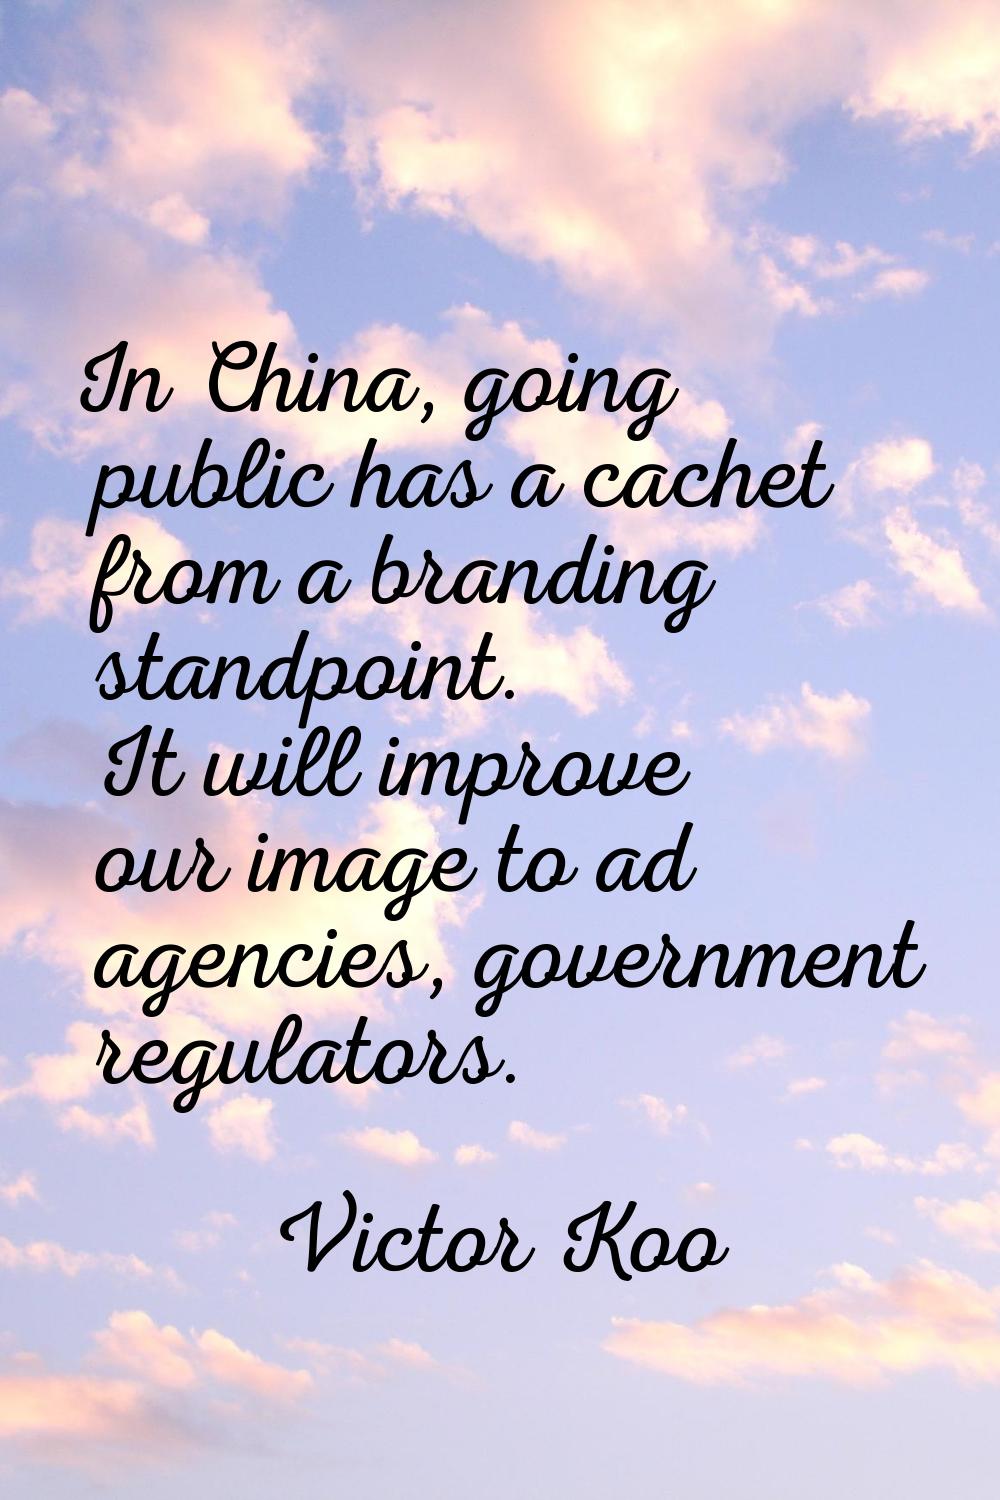 In China, going public has a cachet from a branding standpoint. It will improve our image to ad age